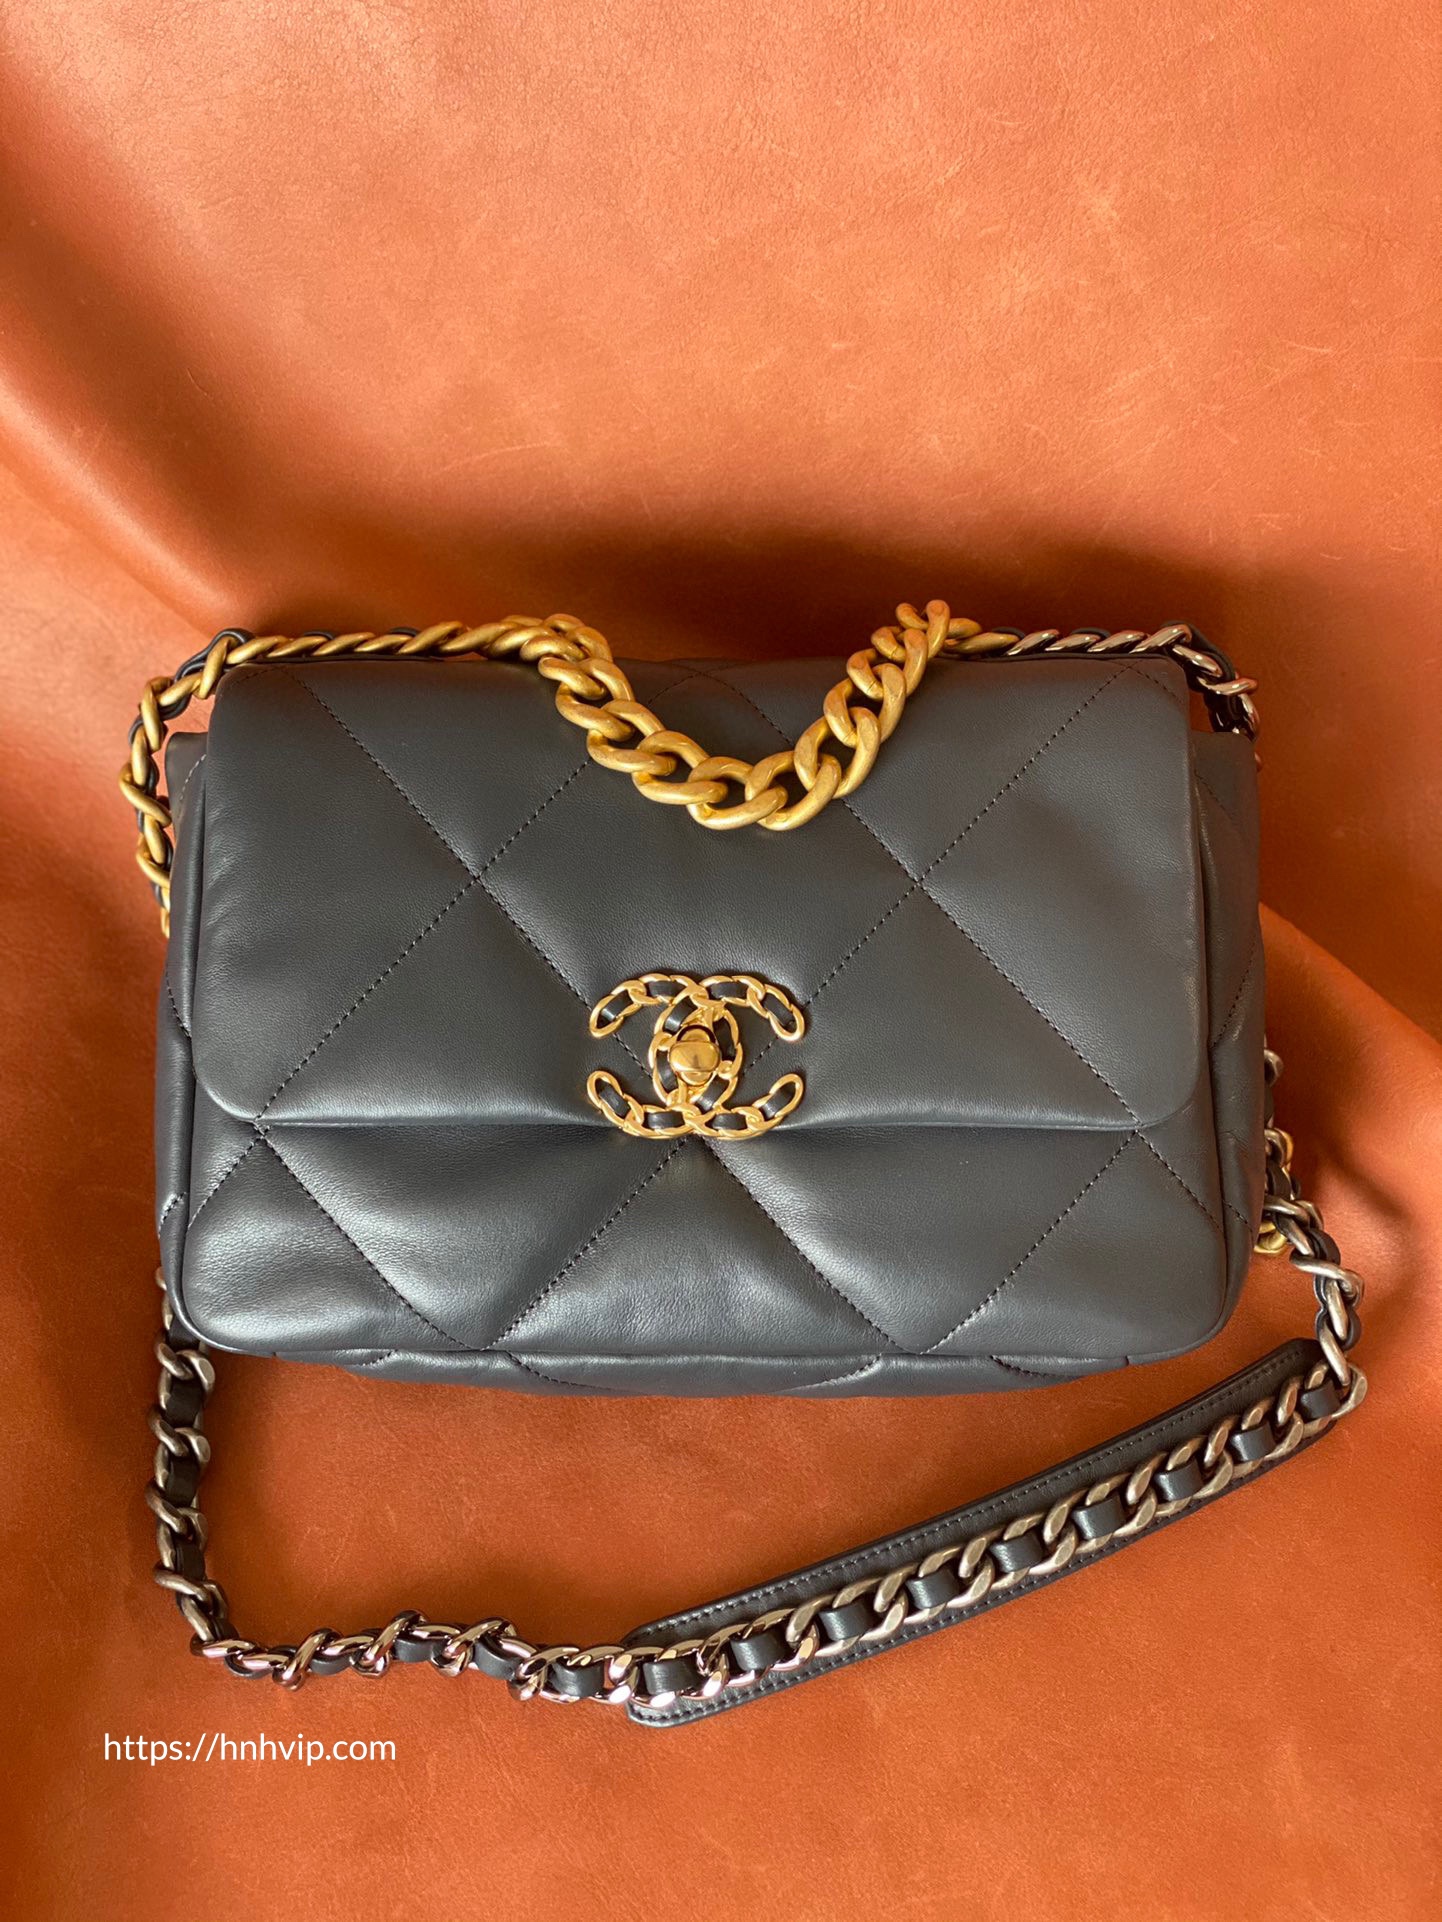 Chanel 19 Bag How The Vogue Editors Are Styling Chanels New Bag  British  Vogue